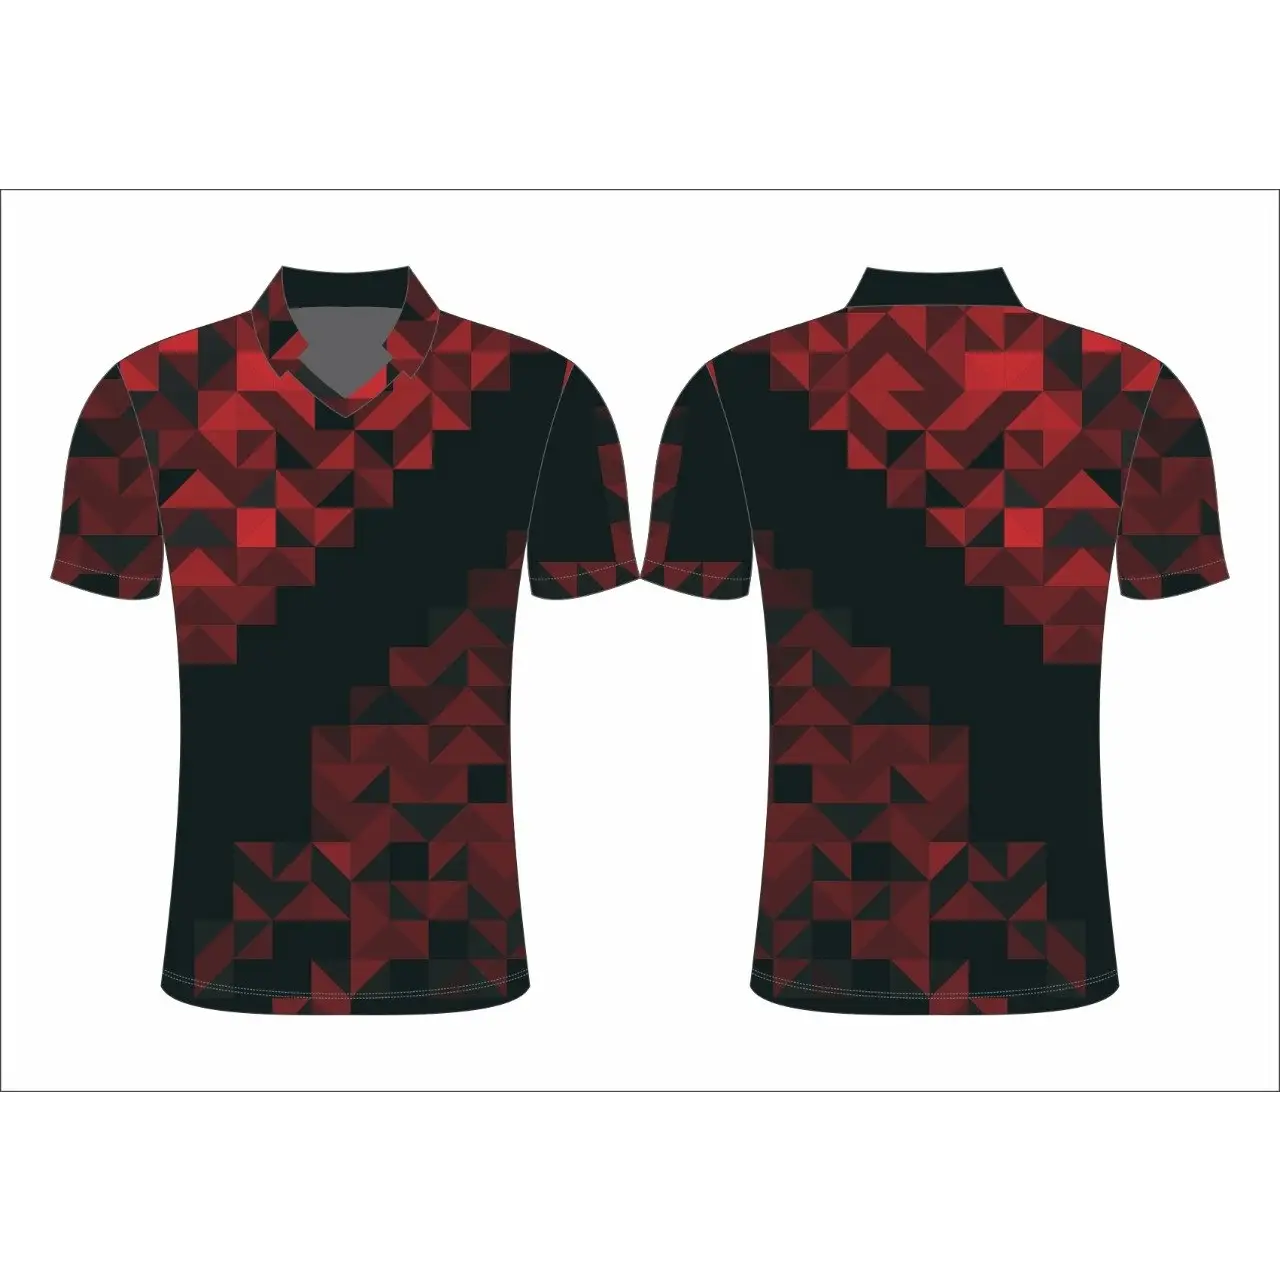 Cricket Jersey Red Black Customized Sublimation Shirt - Chat/Call/email for price - CLOTHING CUSTOM